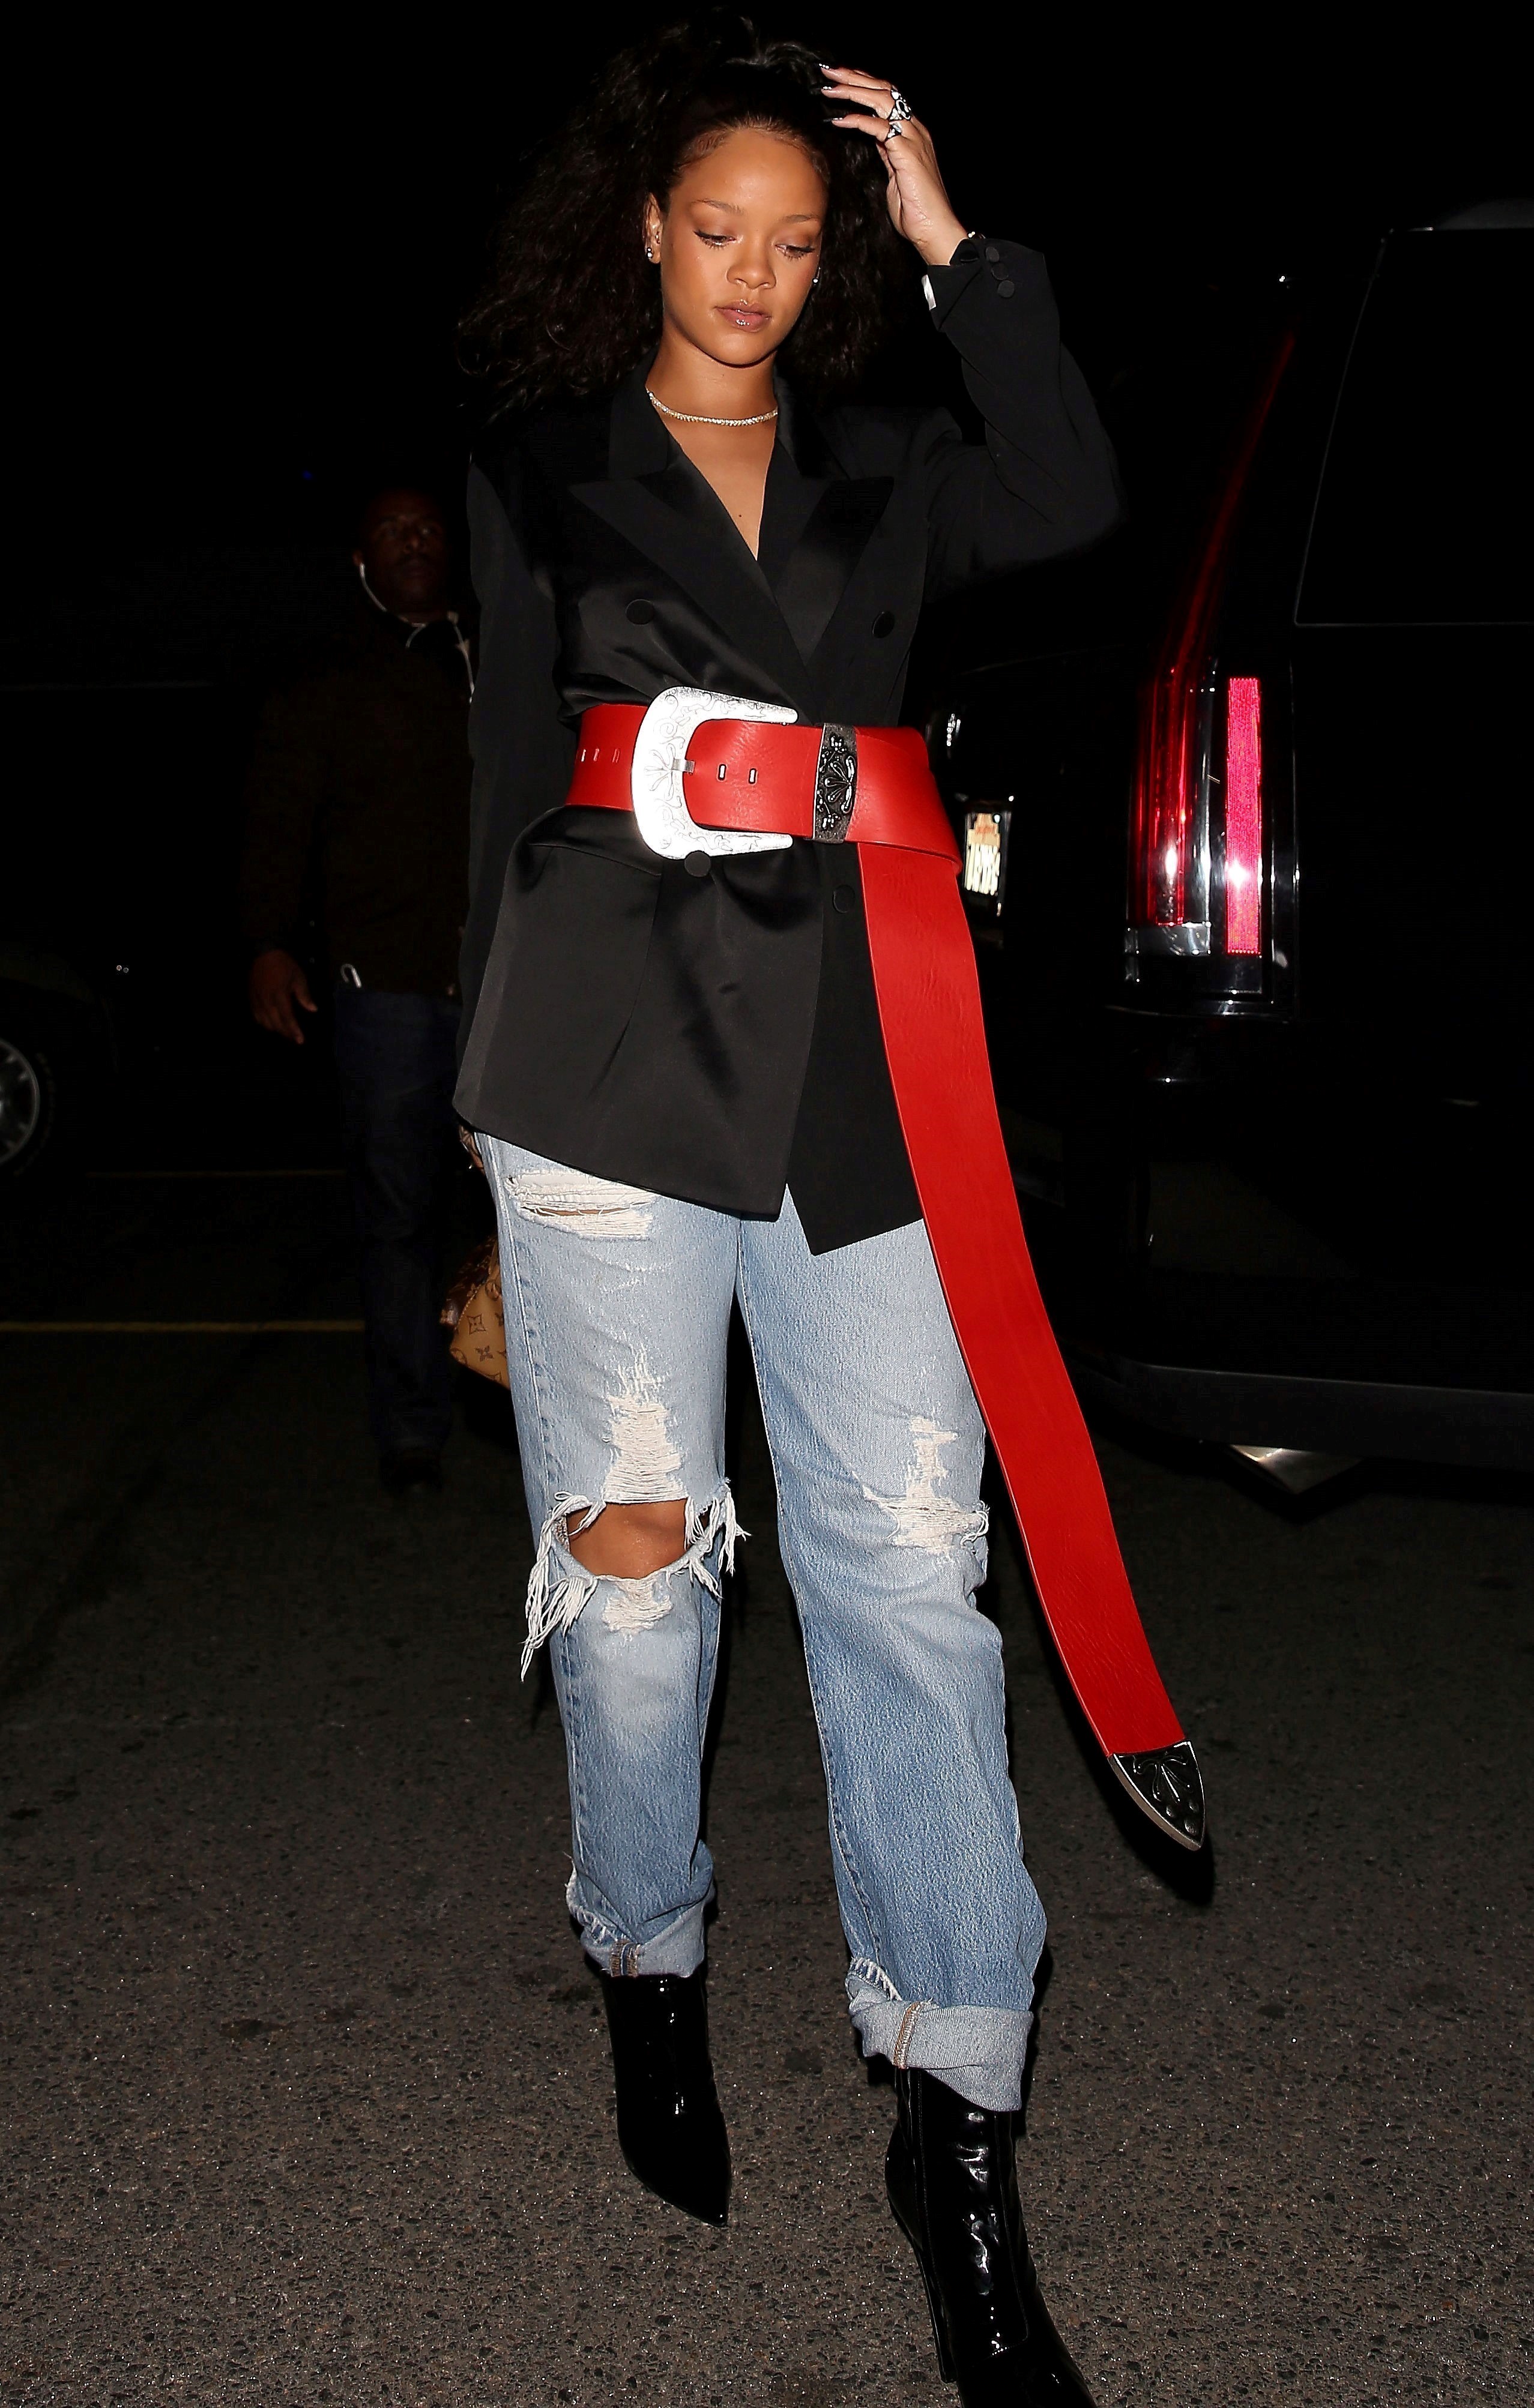 - Singer, Rihanna, is a trendsetter and she showed just that showing up at Girogio Baldi with giant belt buckle and red belt to go with it.  She was seen in black coat, ripped jeans, black boots, and red wide belt with a big buckle.  AKM-GSI 20 DEZEMBRO 2016Carolina Fernandes (11)3280-9759 carol@akmgsi.com.br   Santa Monica CA